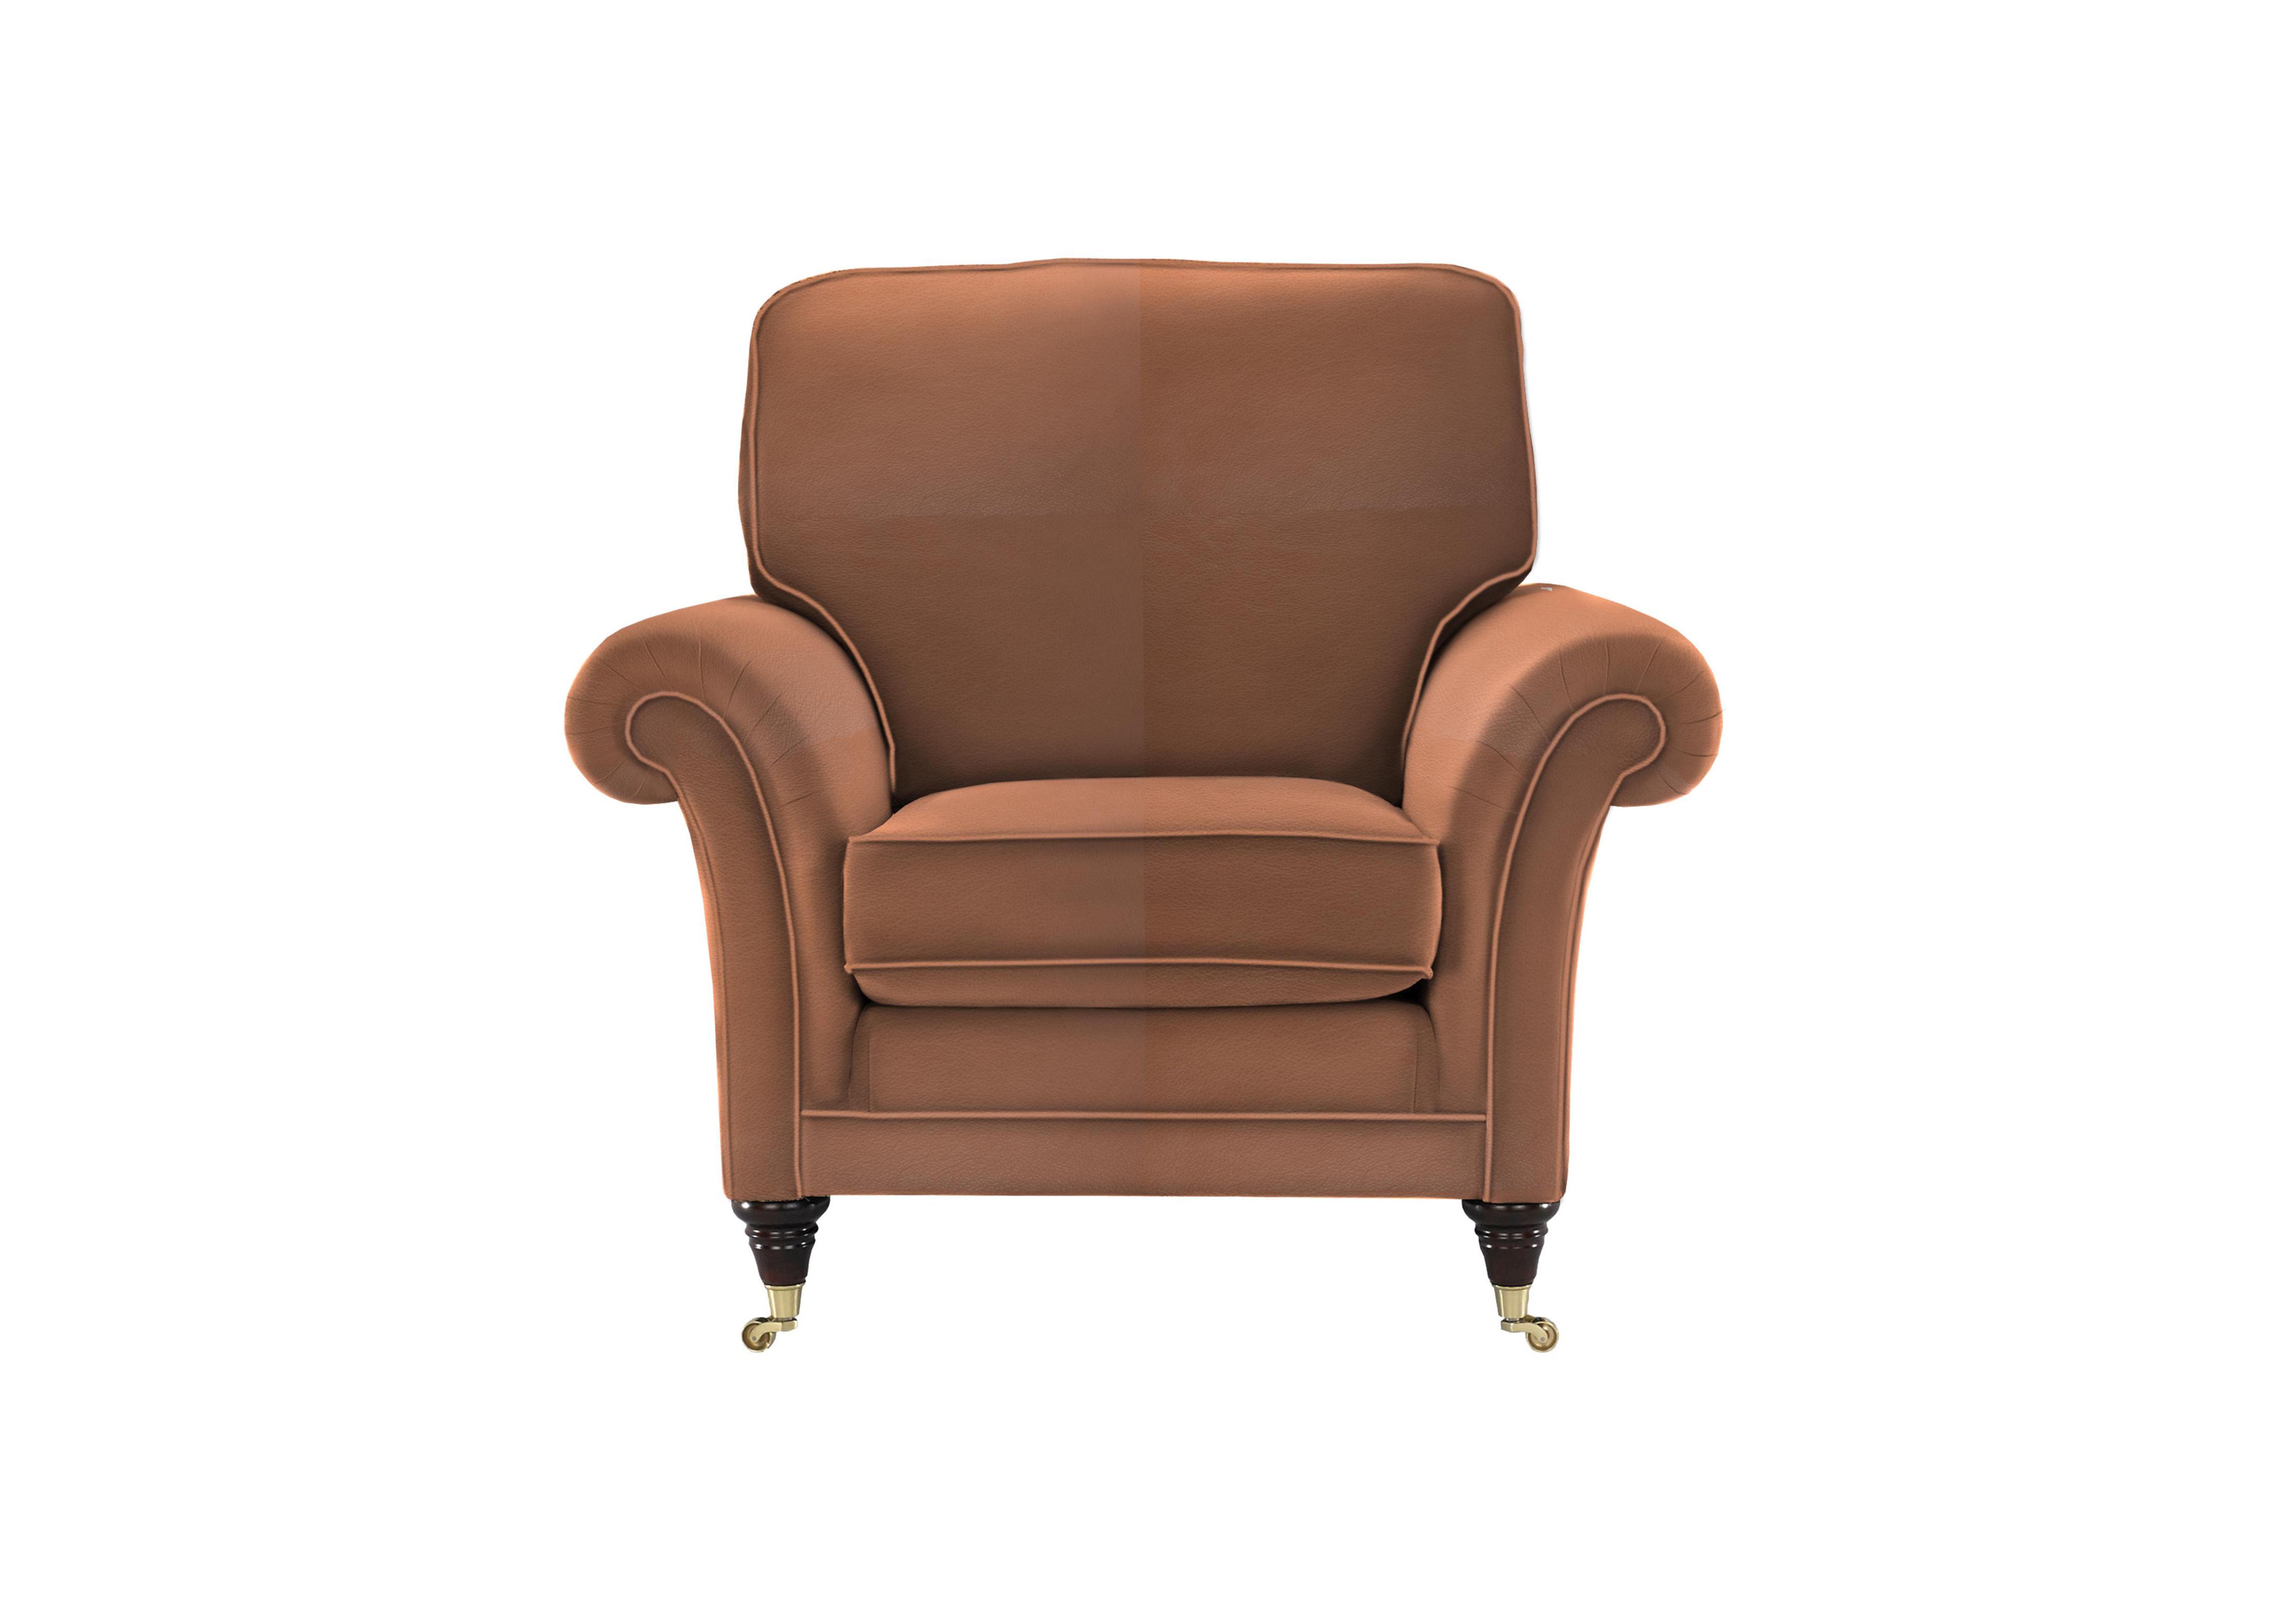 Burghley Leather Chair in 009019-0025 Roma Nutmeg on Furniture Village